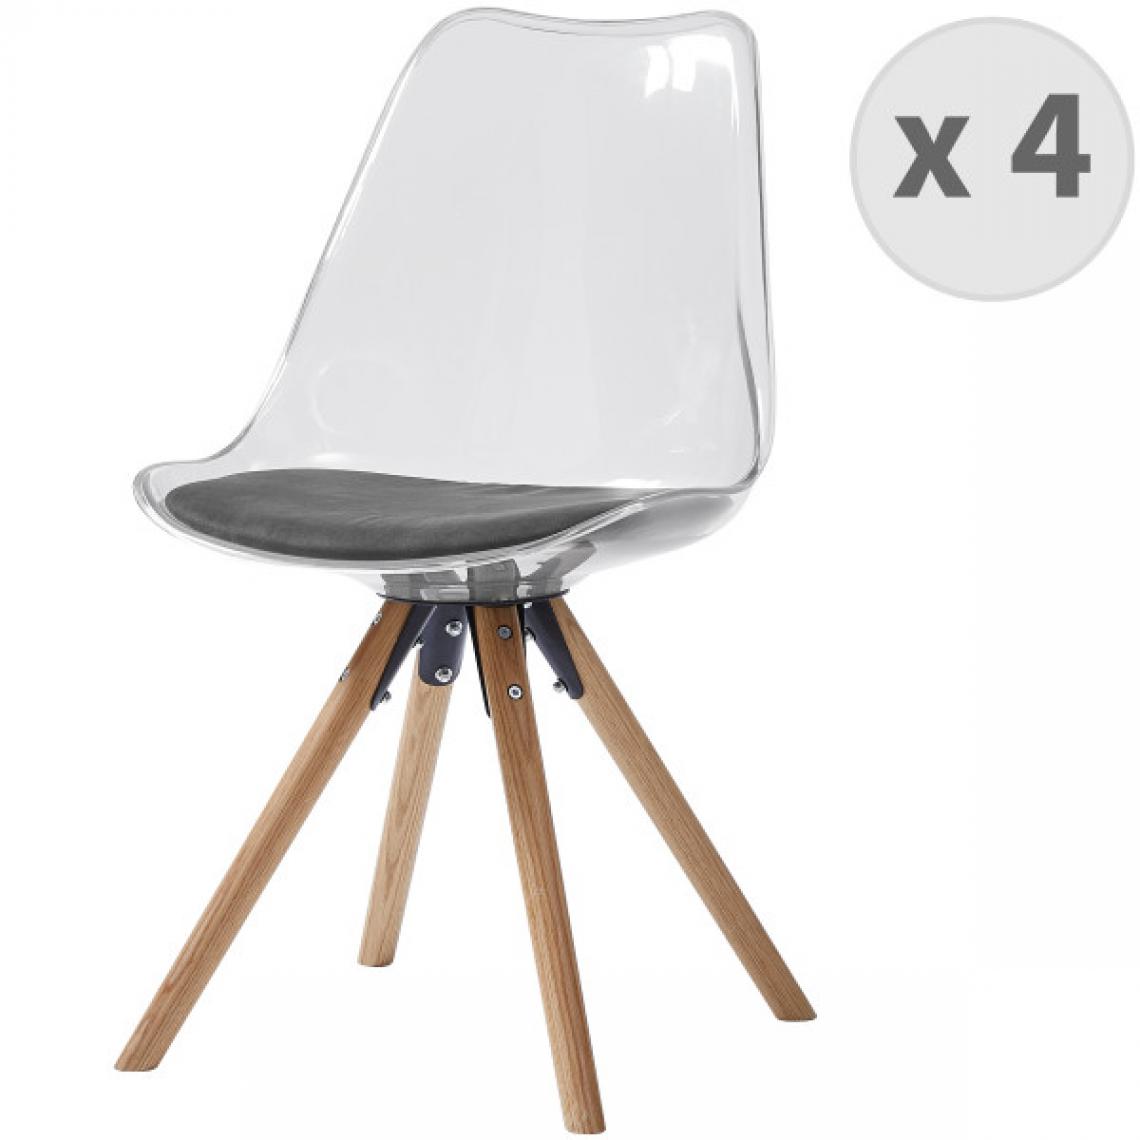 Moloo - ICE-Chaise design polycarbonate pieds chêne (x4) - Chaises